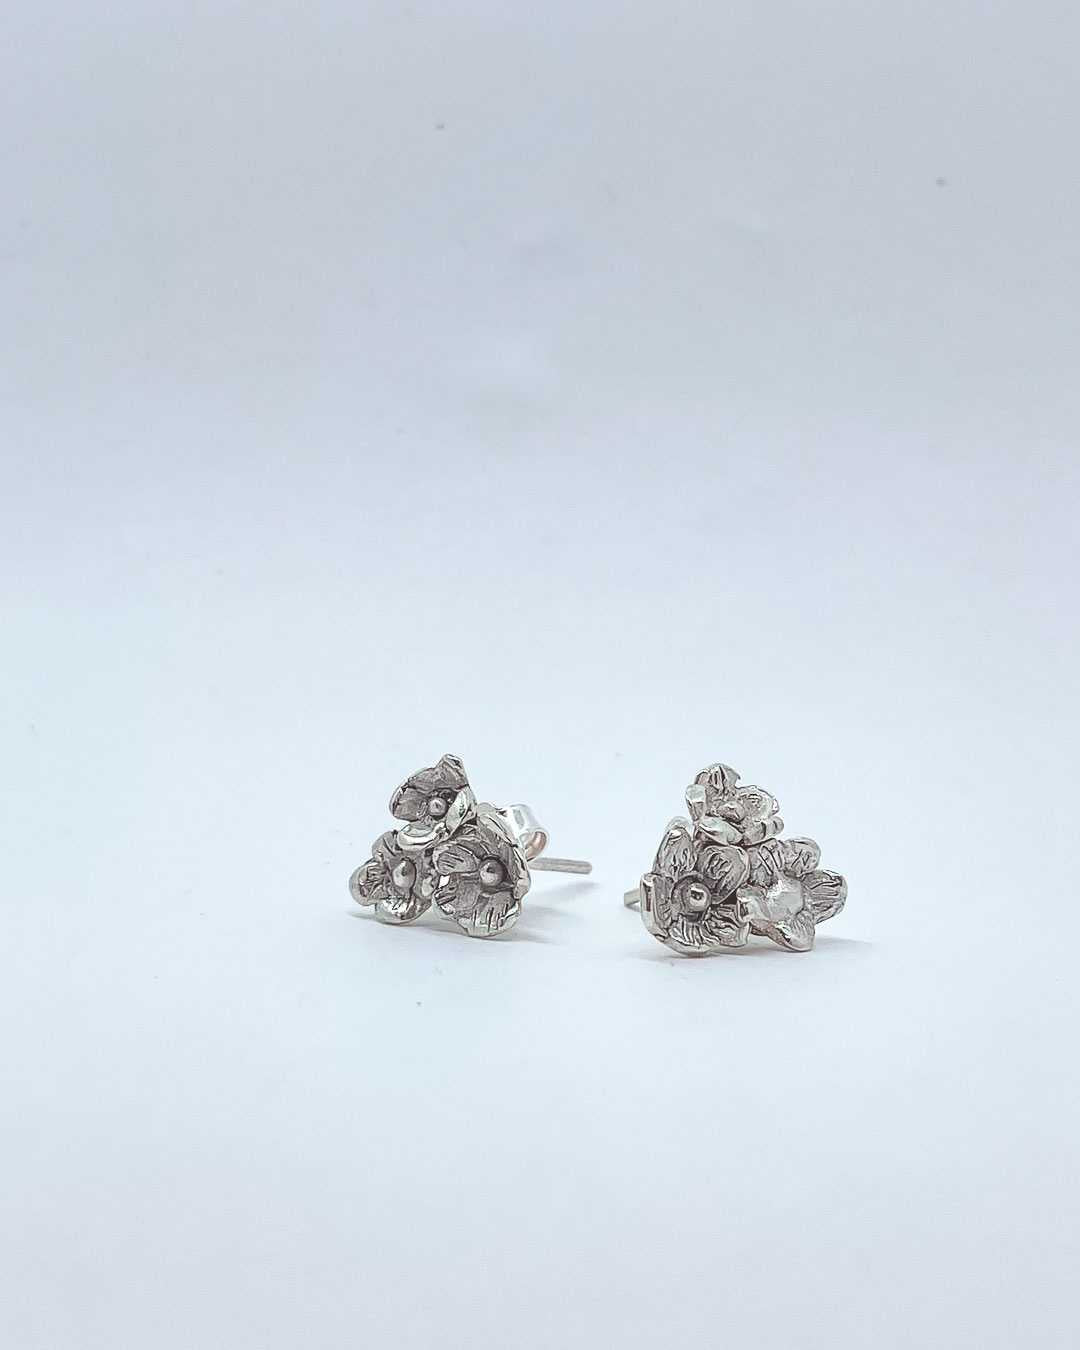 A side profile and front view of a pair of Sterling Silver Flower bouquet Stud Earrings made of 3 Flowers each earring.